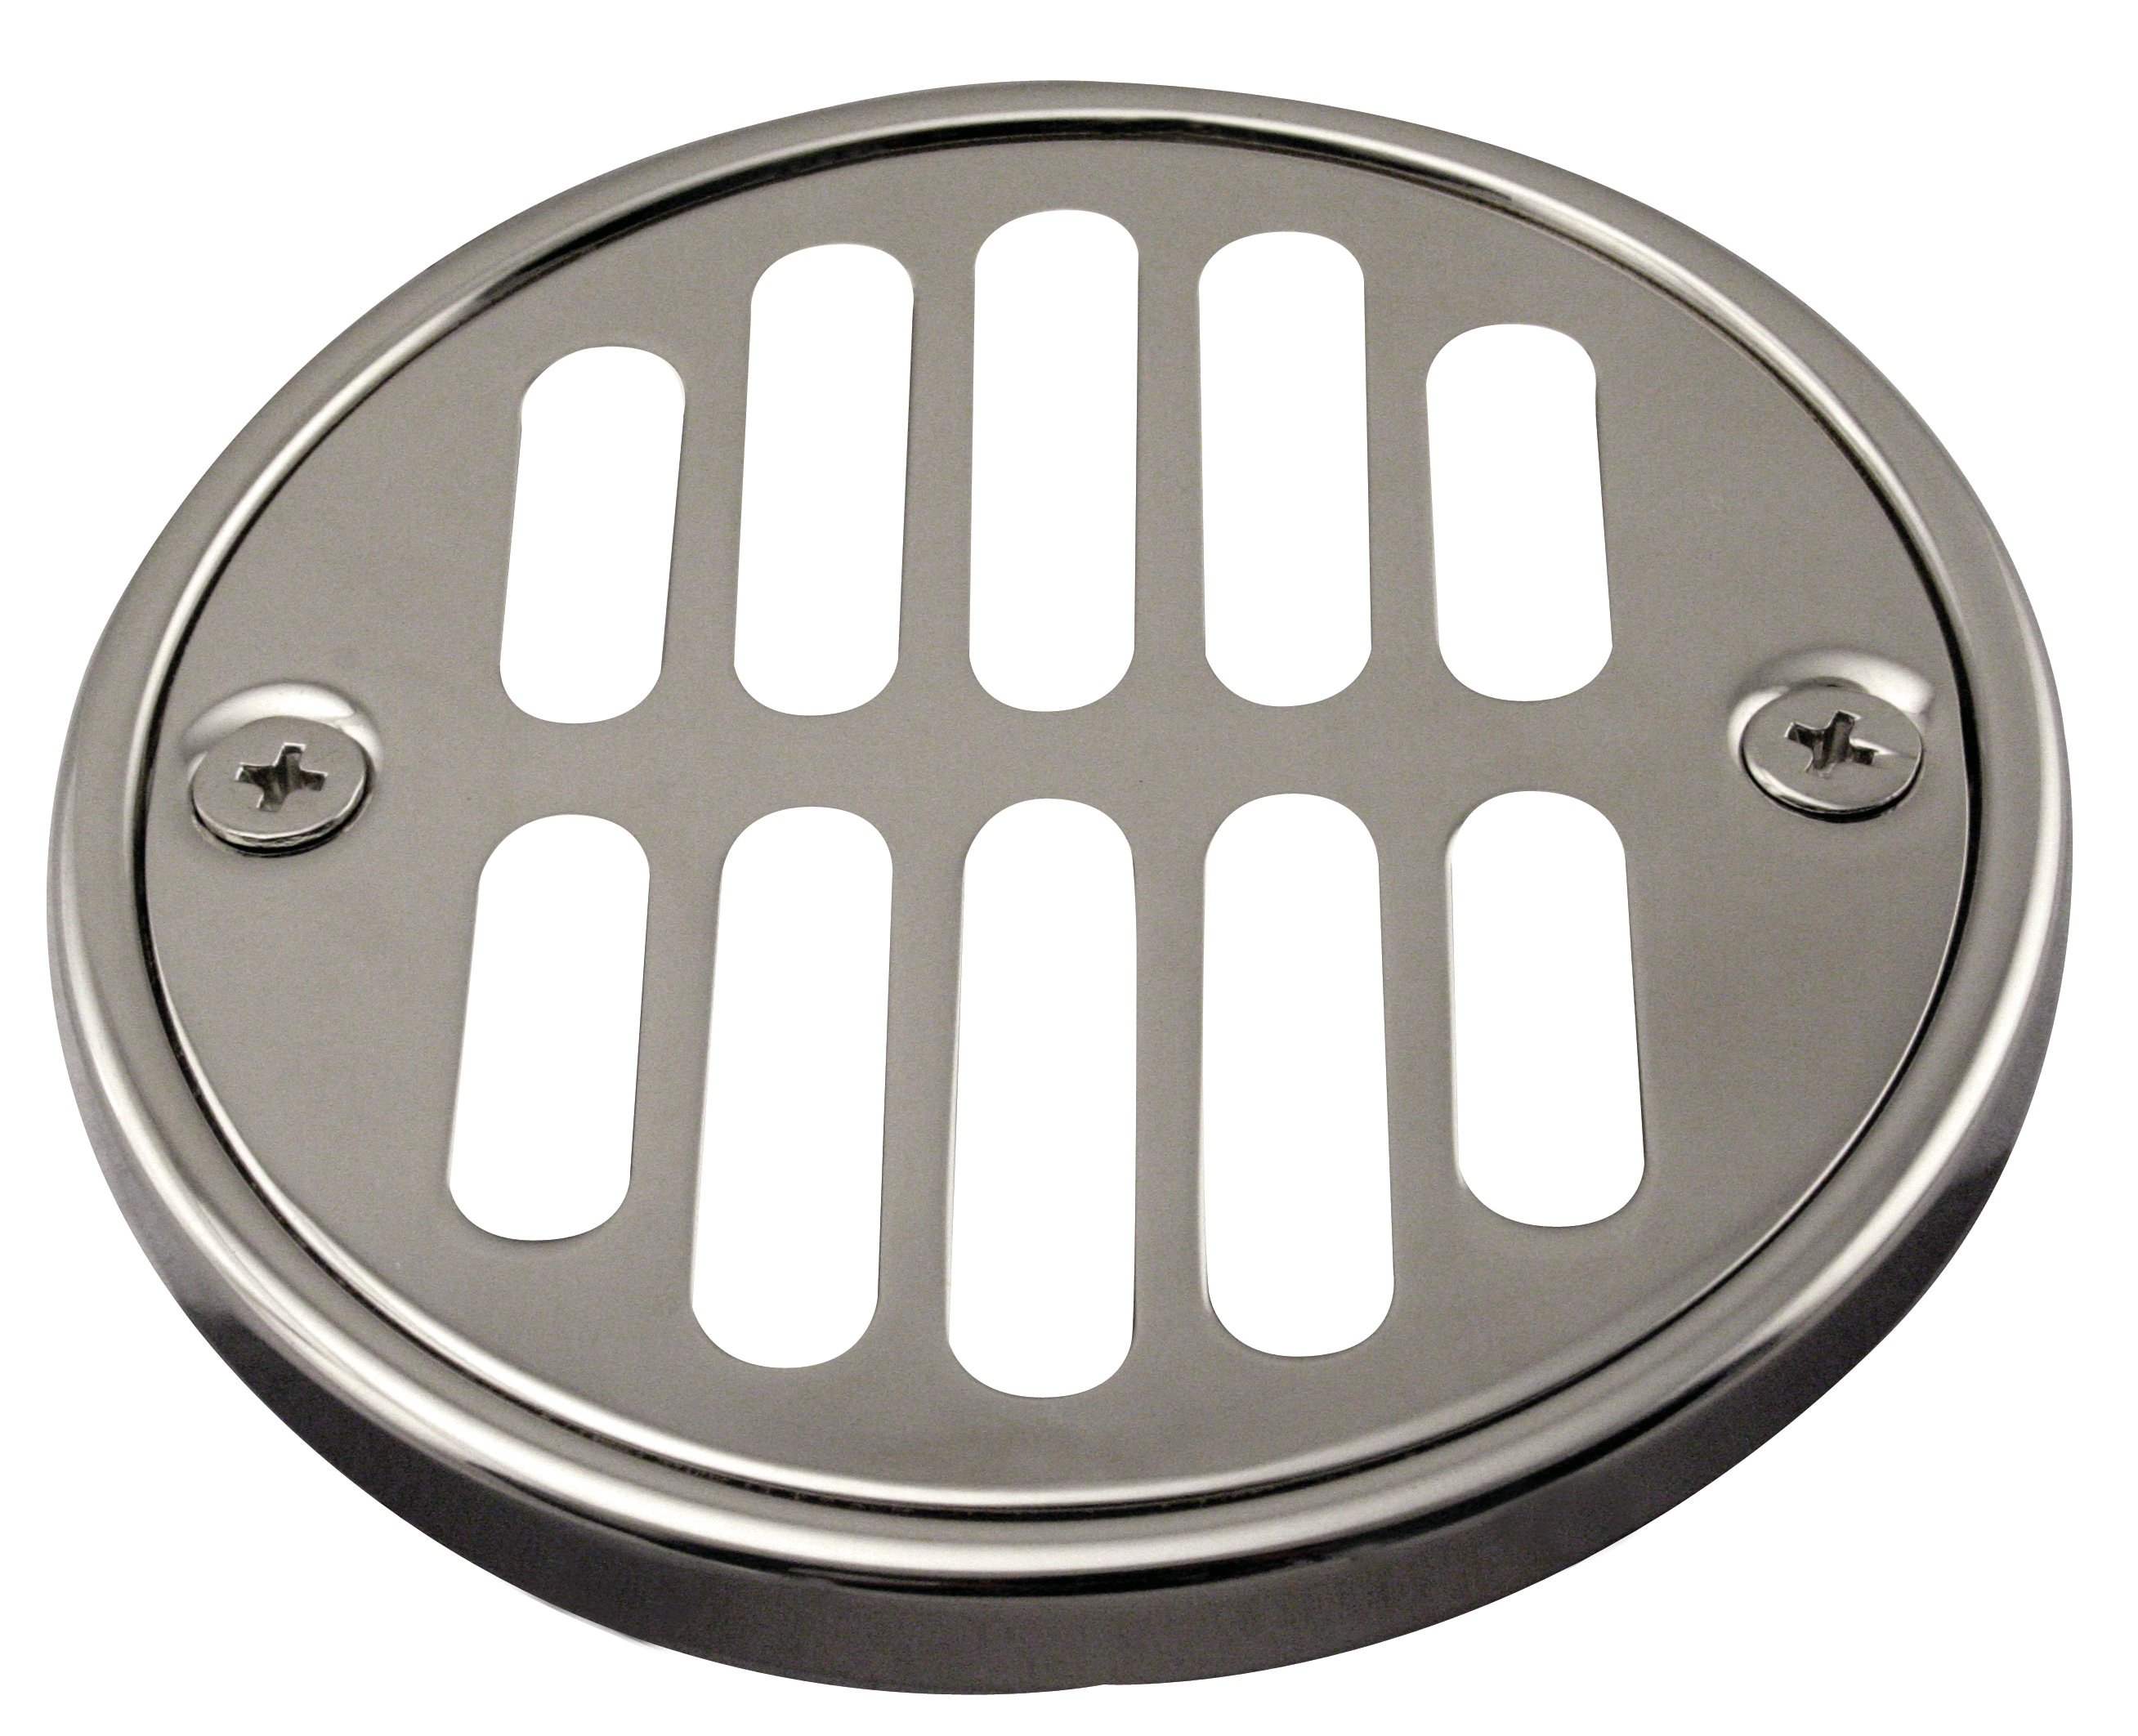 Lasco 3-5/8 In. Stainless Steel Mesh Shower Drain Strainer with Chrome Rim  - Stanford Home Centers